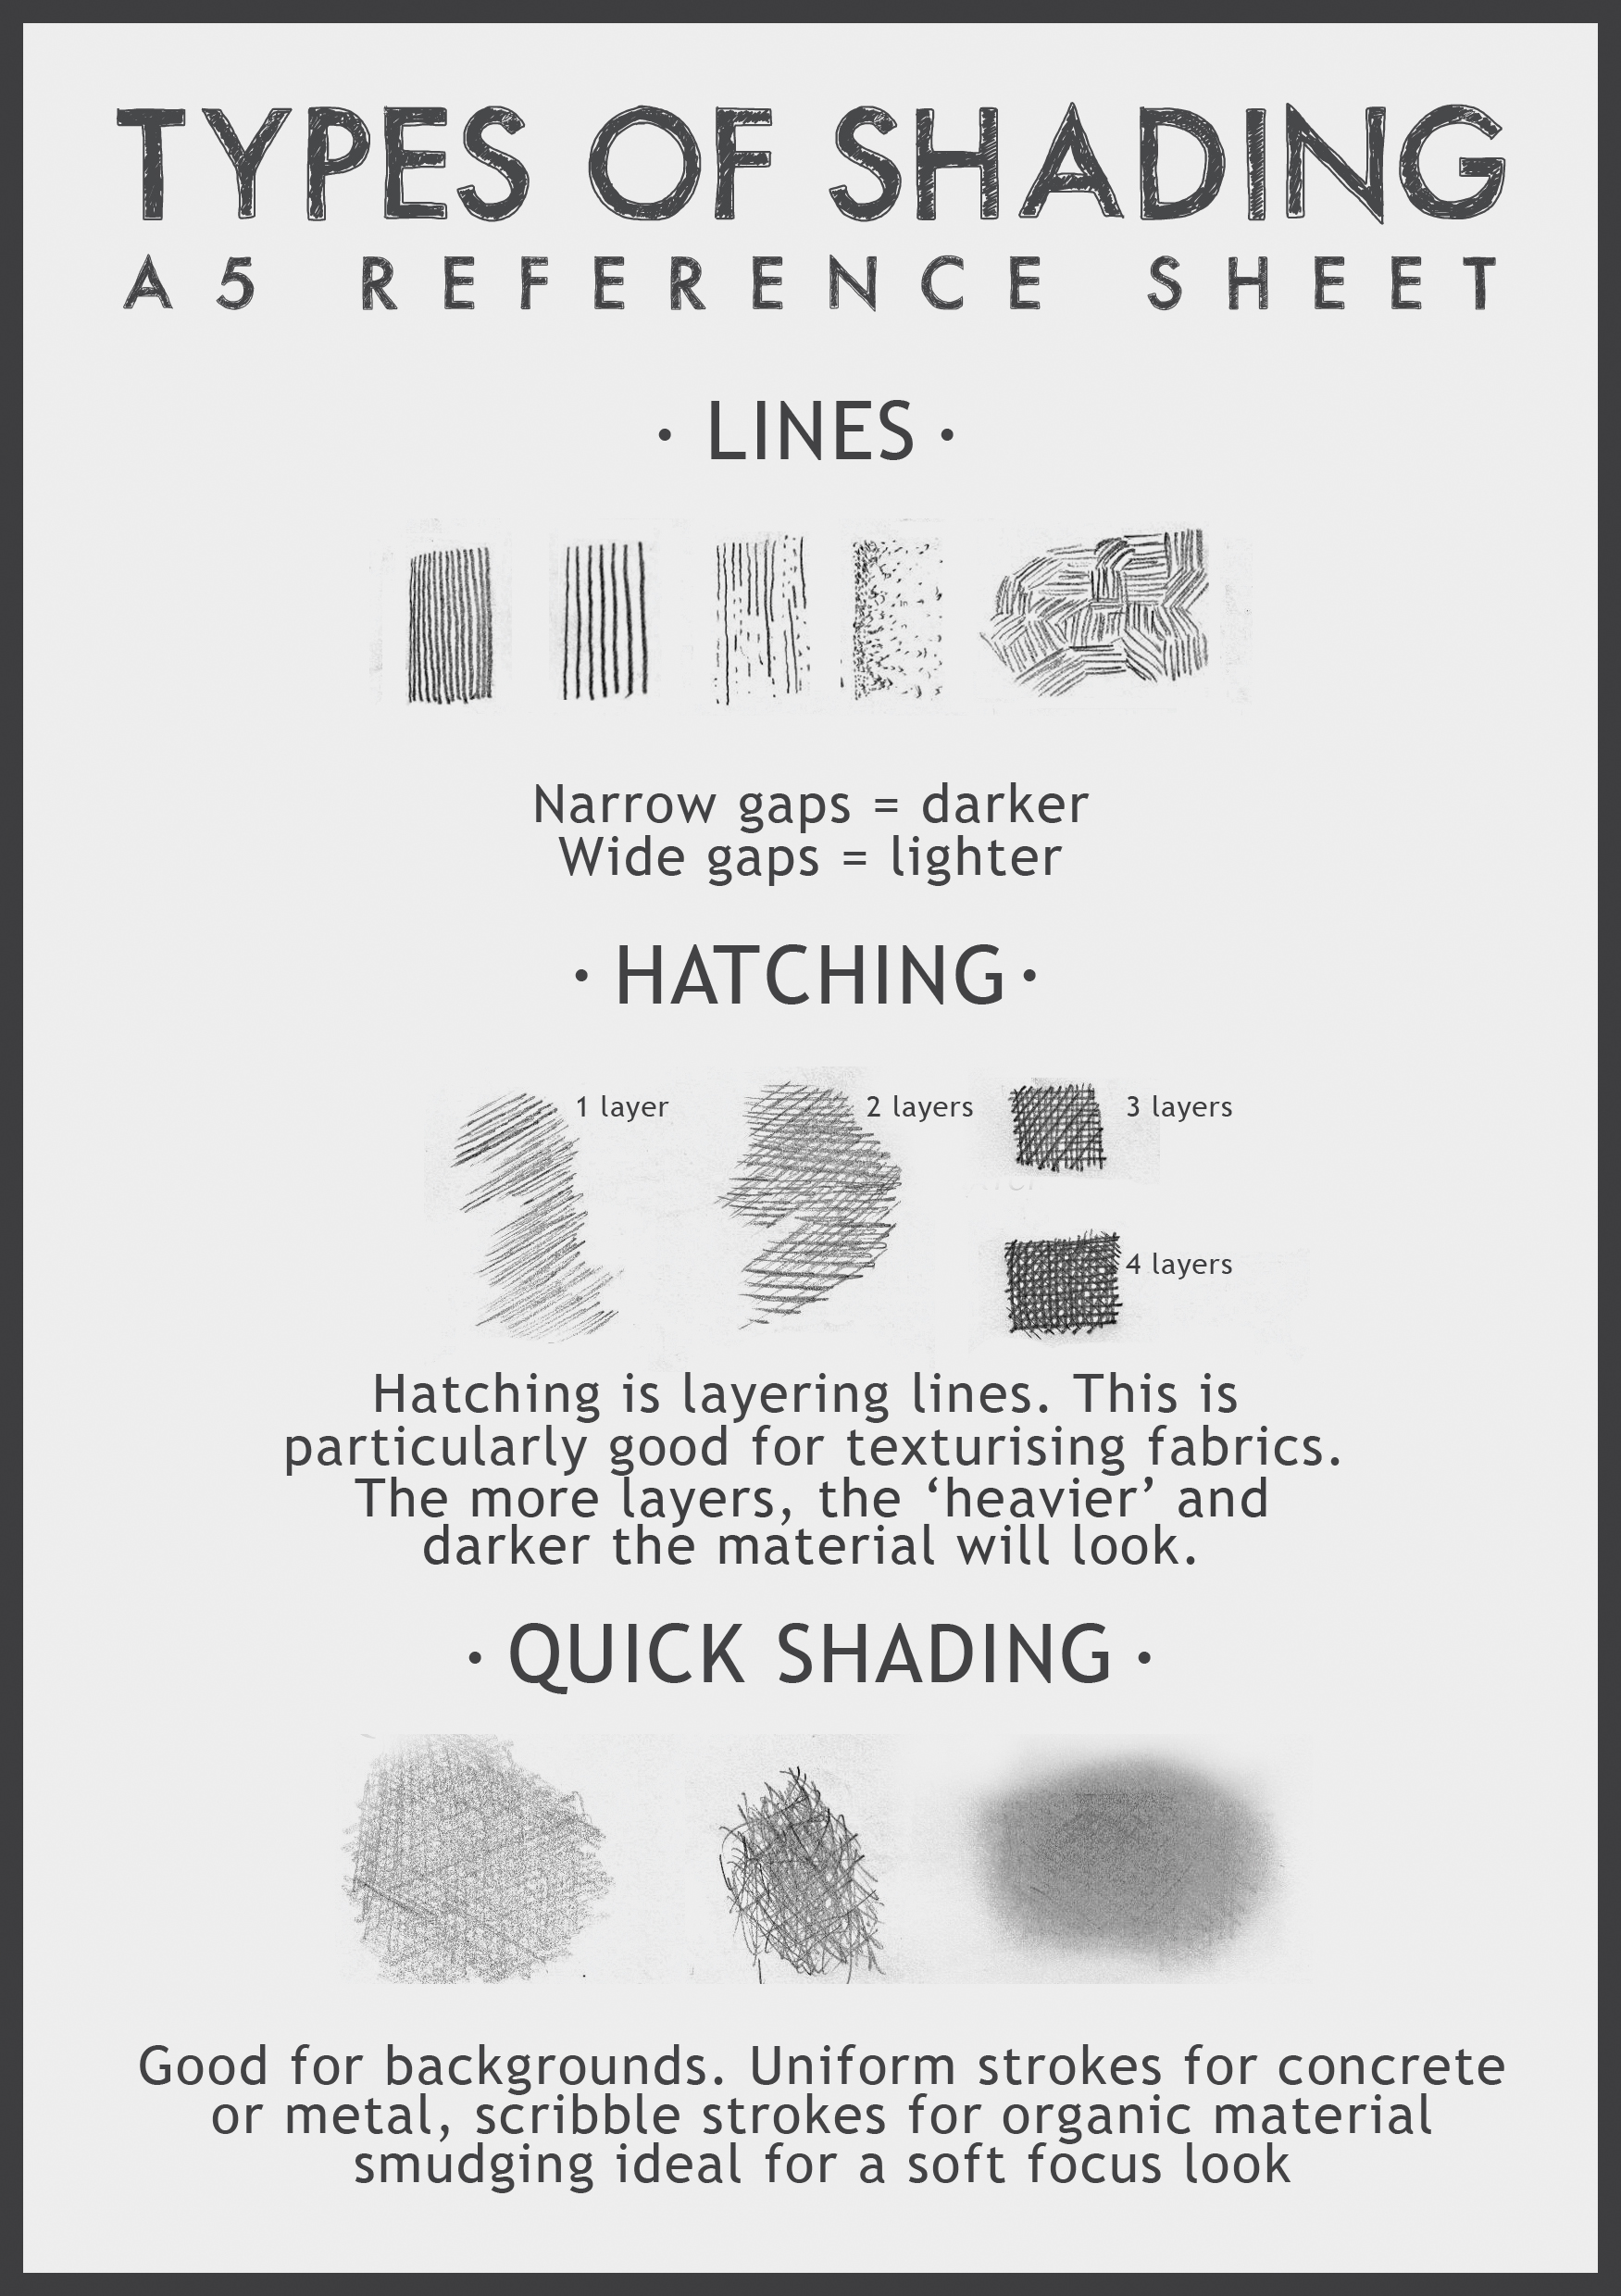 Types of Shading - A5 Reference Sheet